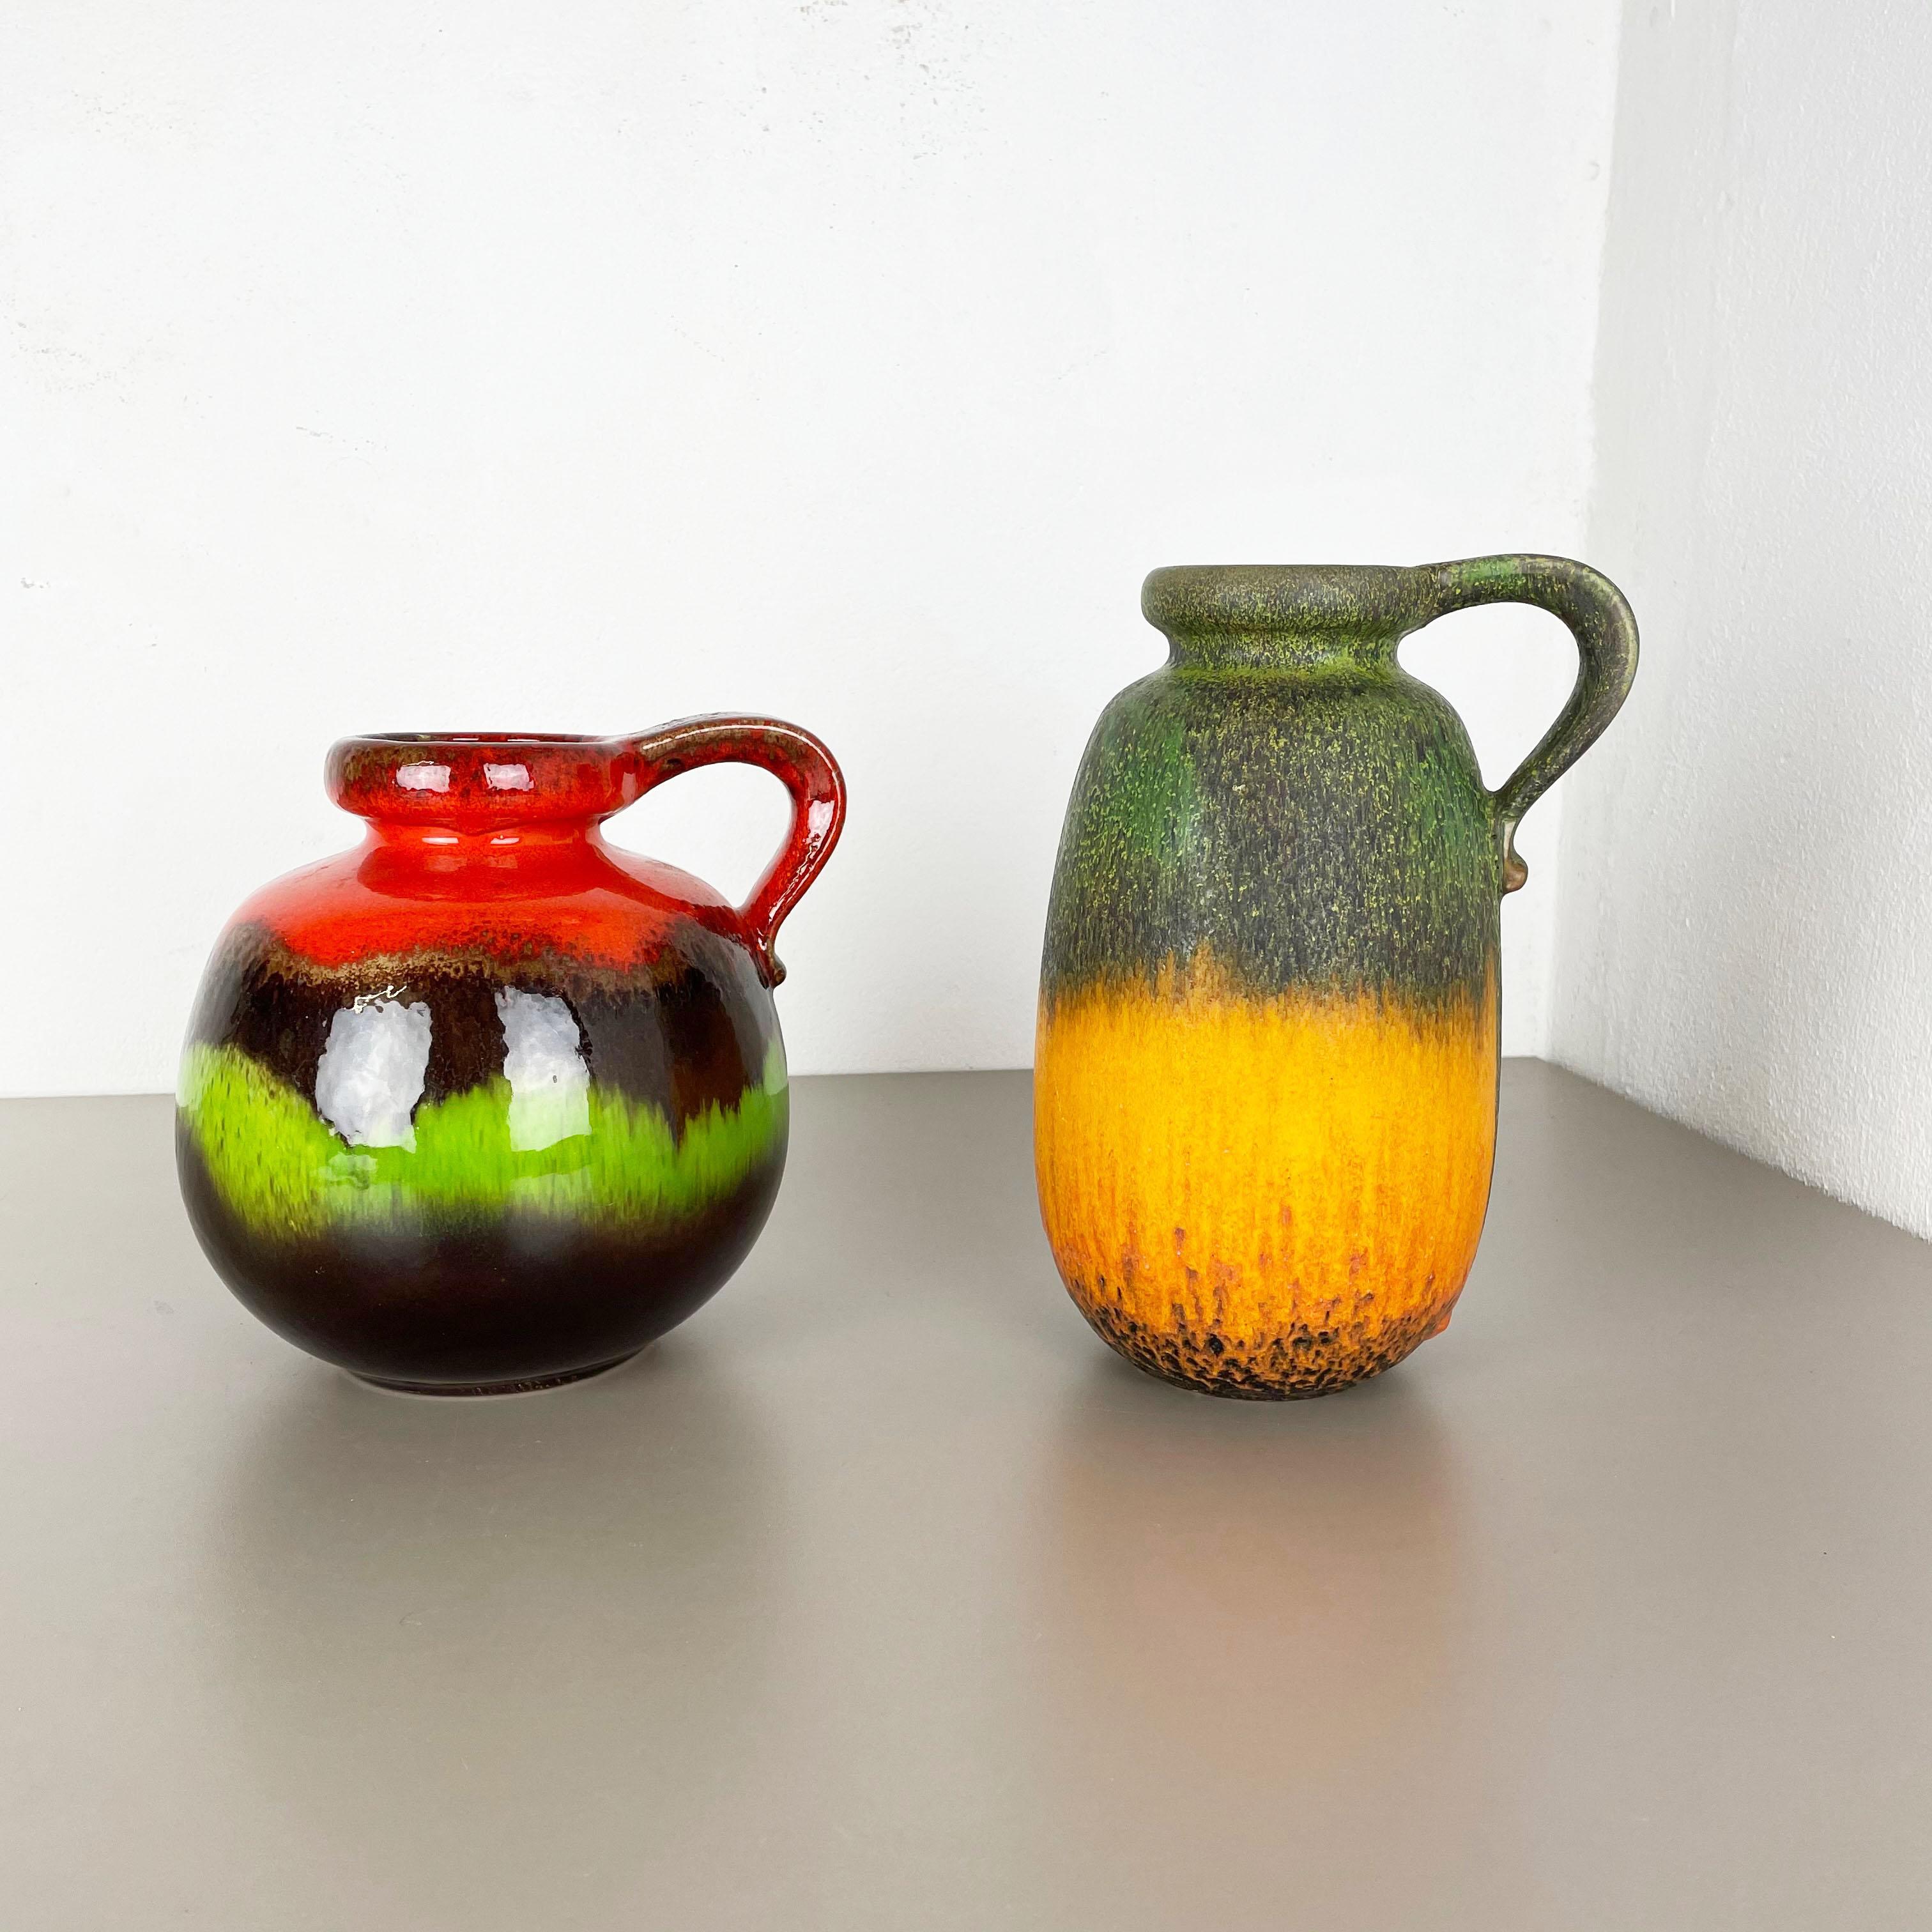 Article:

Set of two fat lava art vases



Producer:

Scheurich, Germany



Decade:

1970s




These original vintage vases was produced in the 1970s in Germany. It is made of ceramic pottery in fat lava optic. Super rare in this